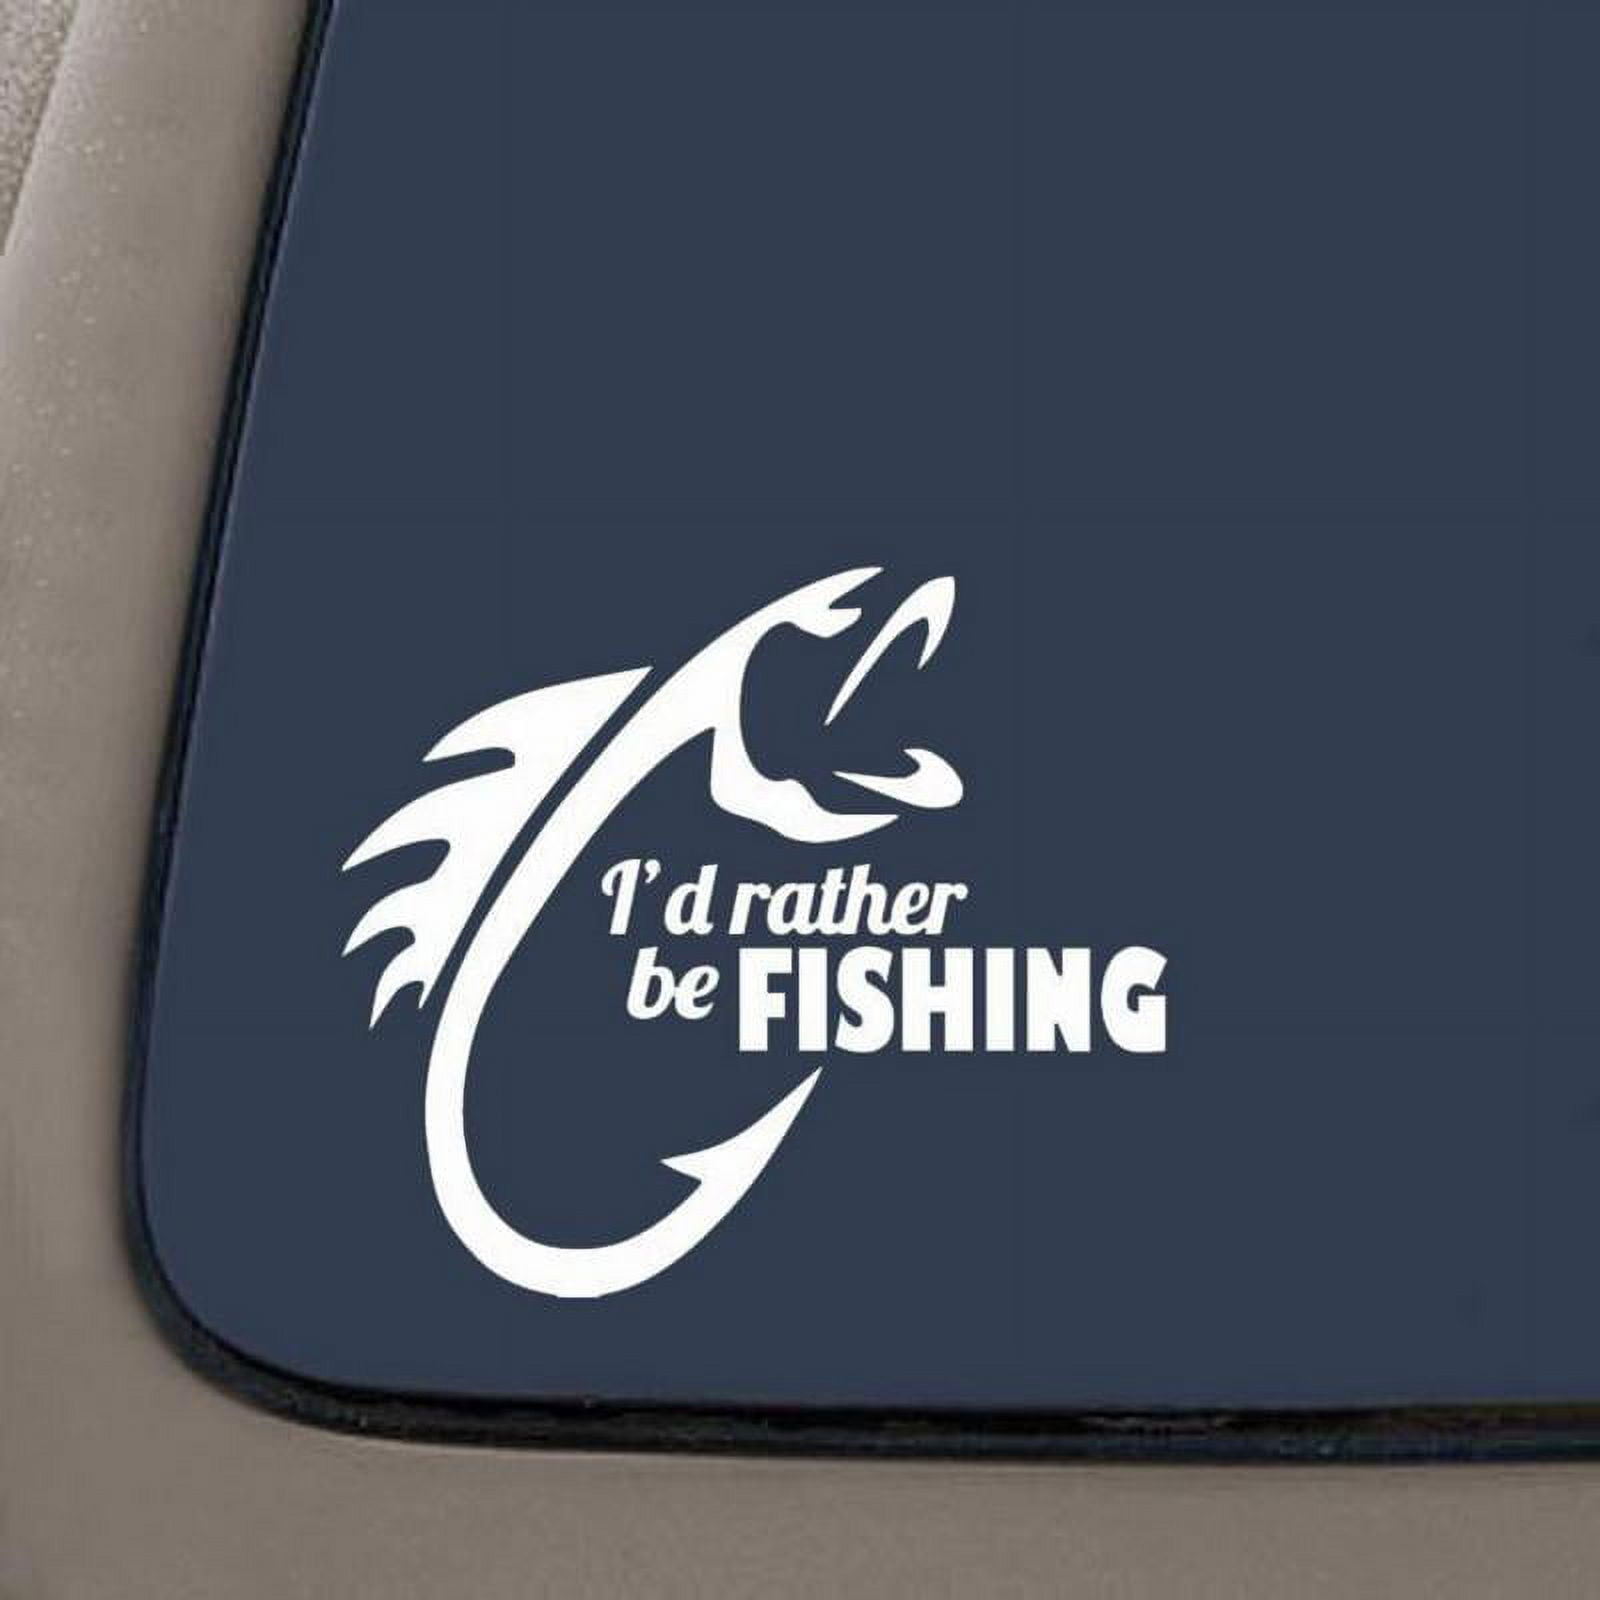 Bass Pro Shops Fishing - Sticker Graphic - Auto, Wall, Laptop, Cell, Truck  Sticker for Windows, Cars, Trucks